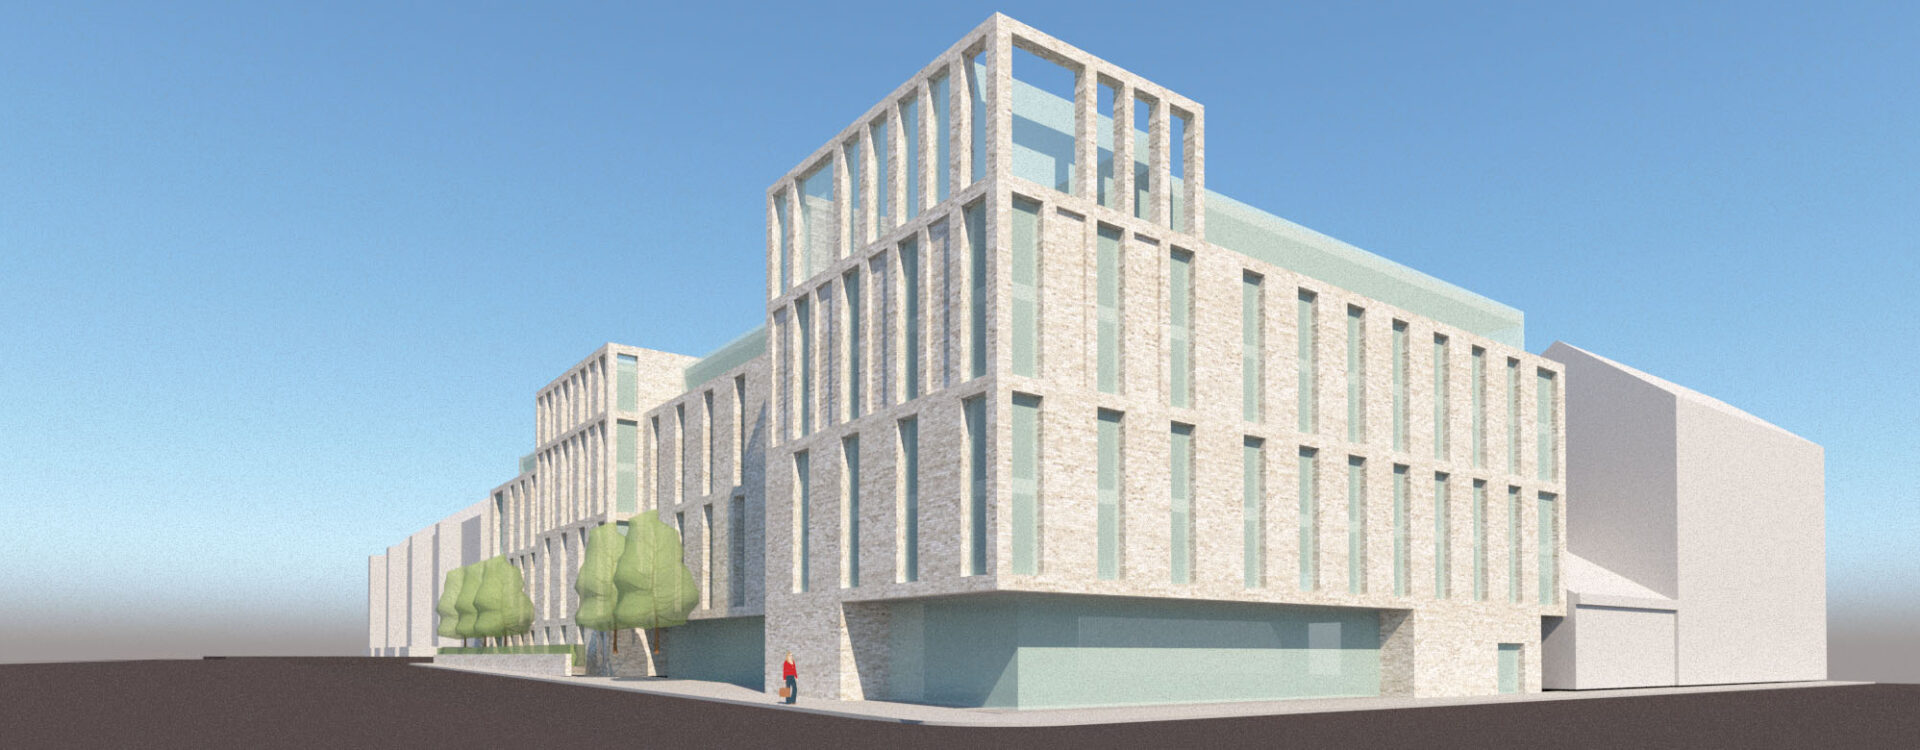 Student accommodation proposal to replace consented Glasgow city centre development